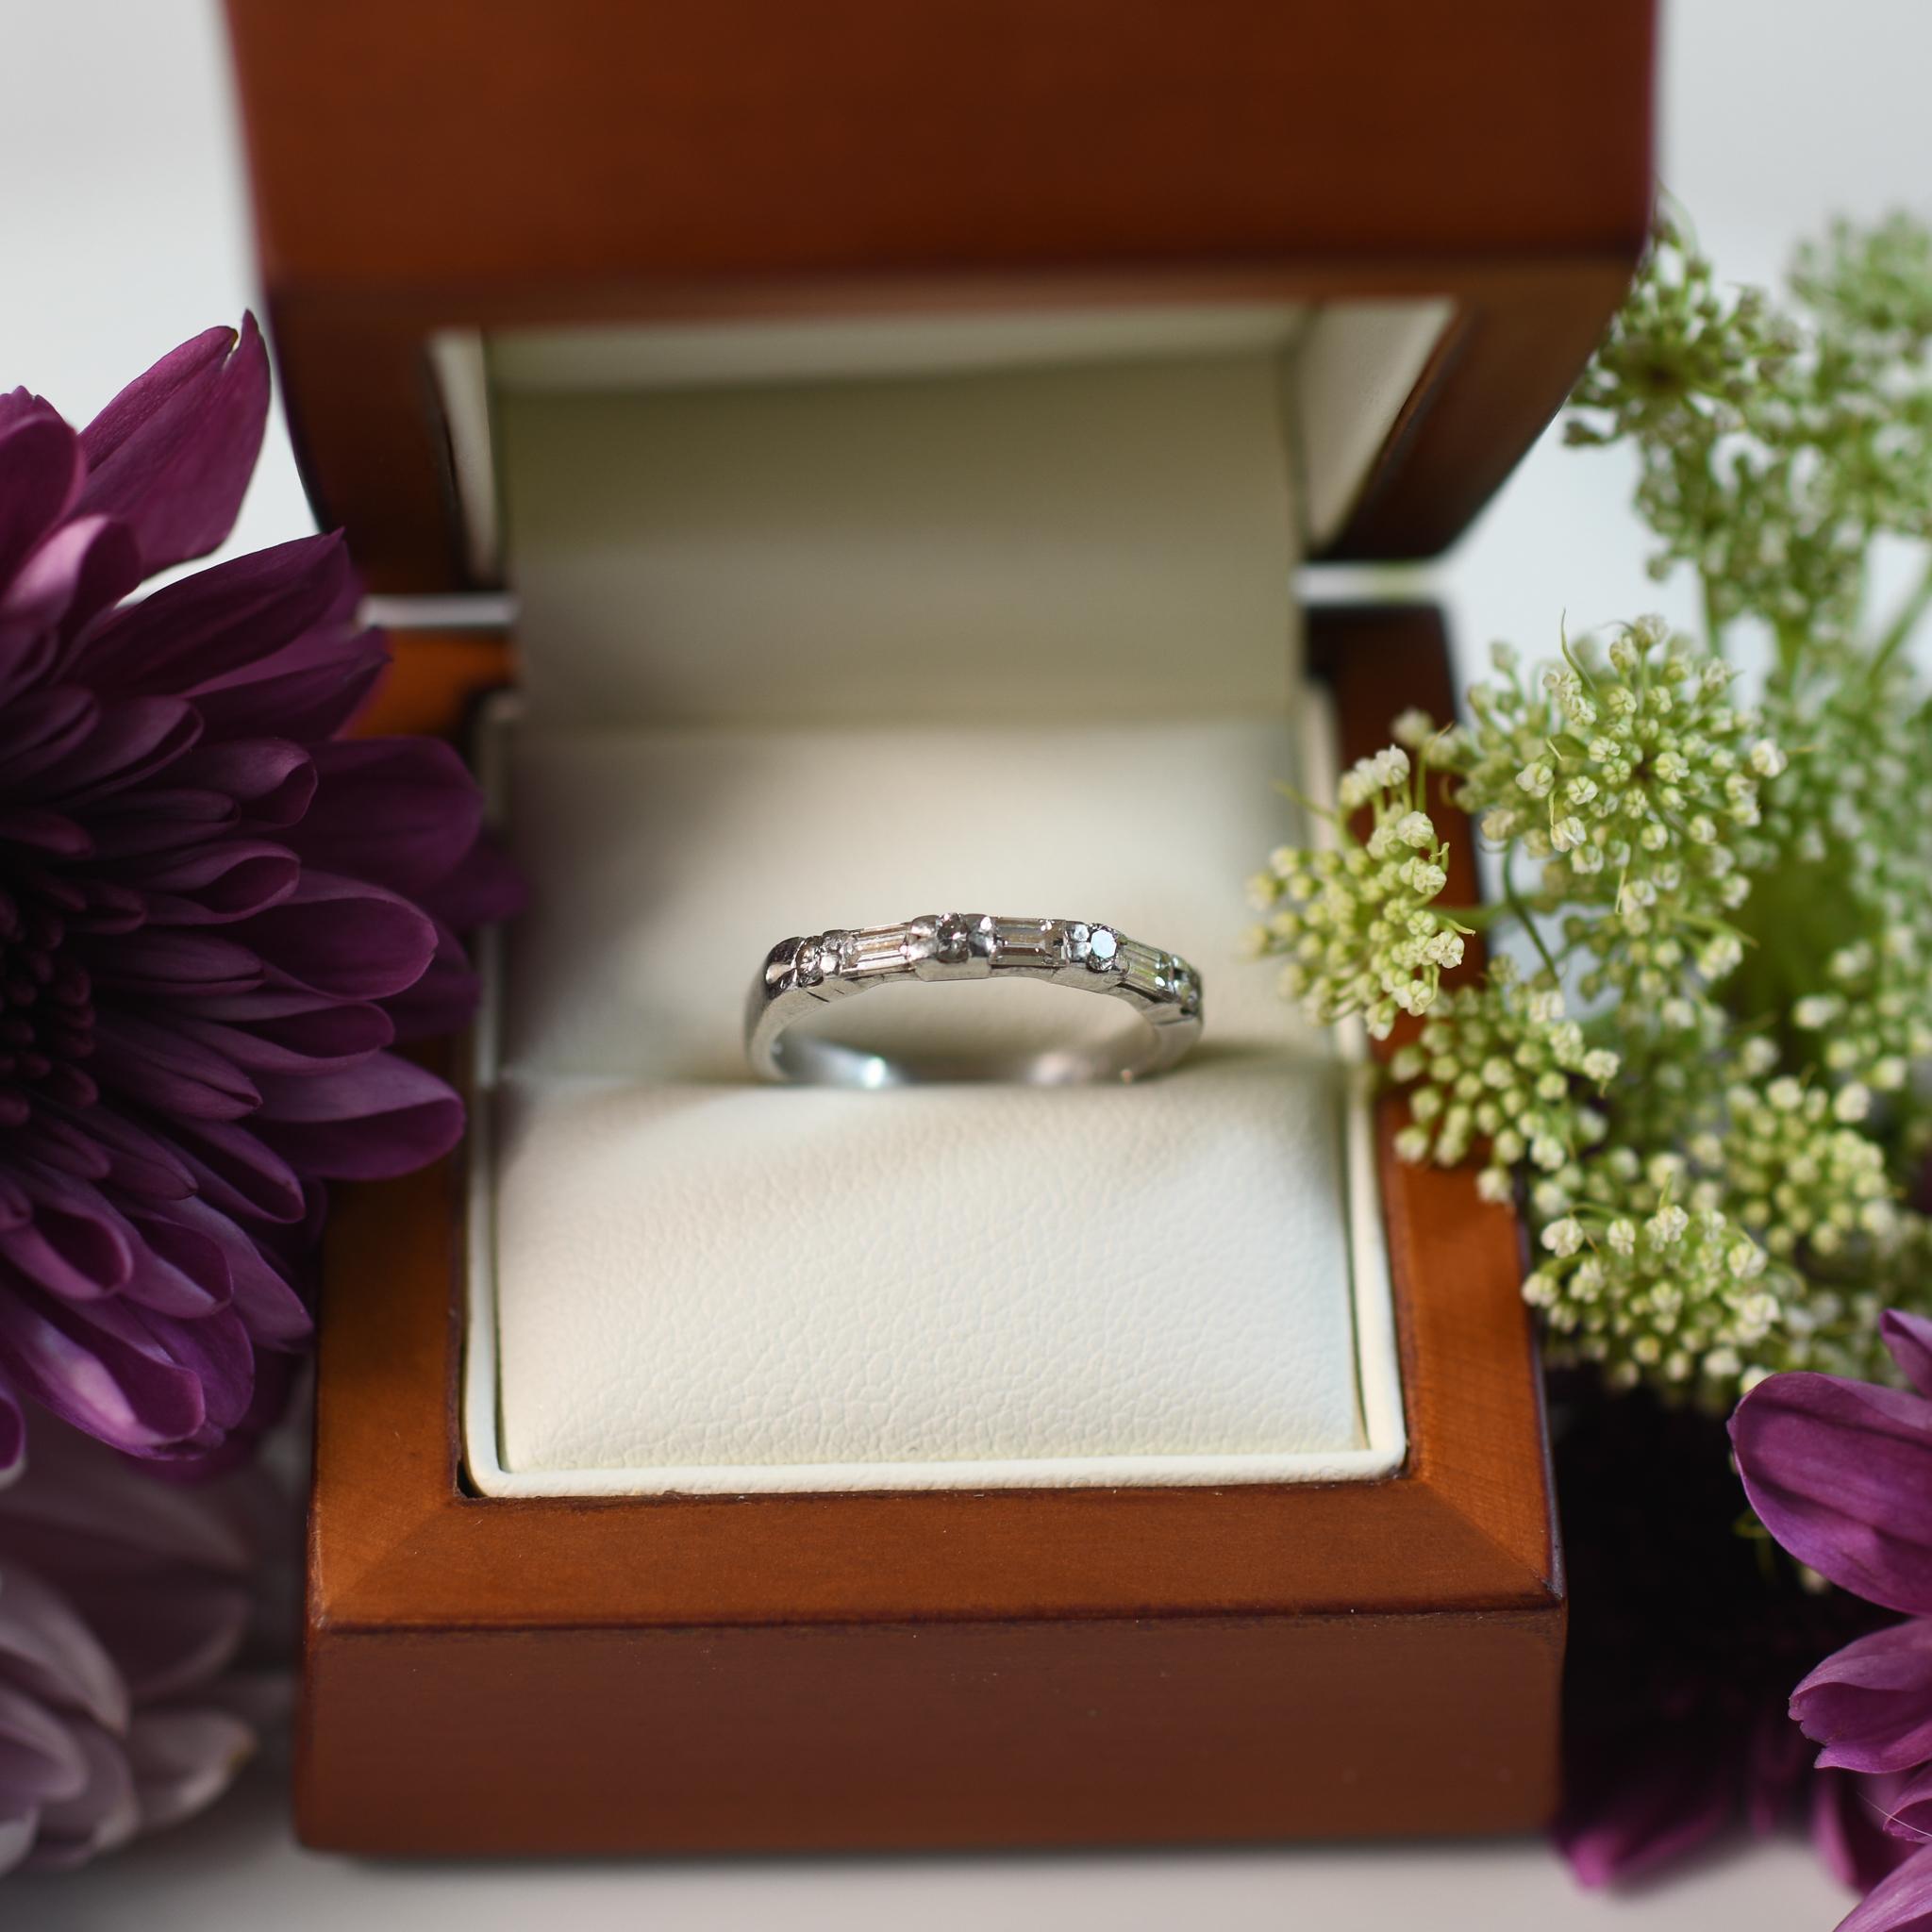 Elevate your style with this exquisite diamond band, meticulously crafted in platinum to radiate timeless sophistication. The band features four round brilliant diamonds, totaling 0.10 carats, and three emerald-cut diamonds, totaling 0.30 carats,